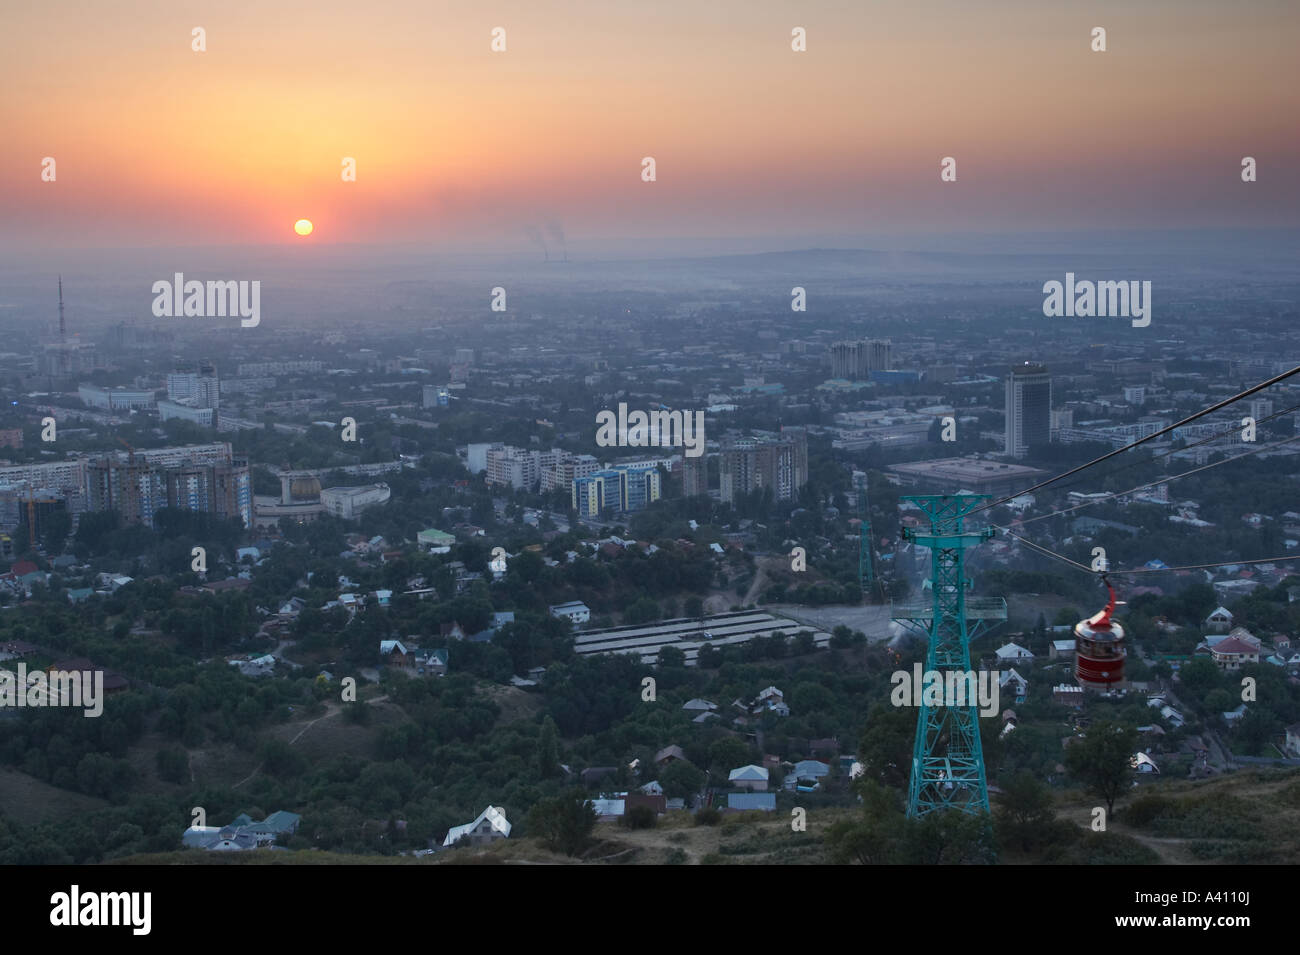 Sunset Over Almaty With Cable Car Stock Photo